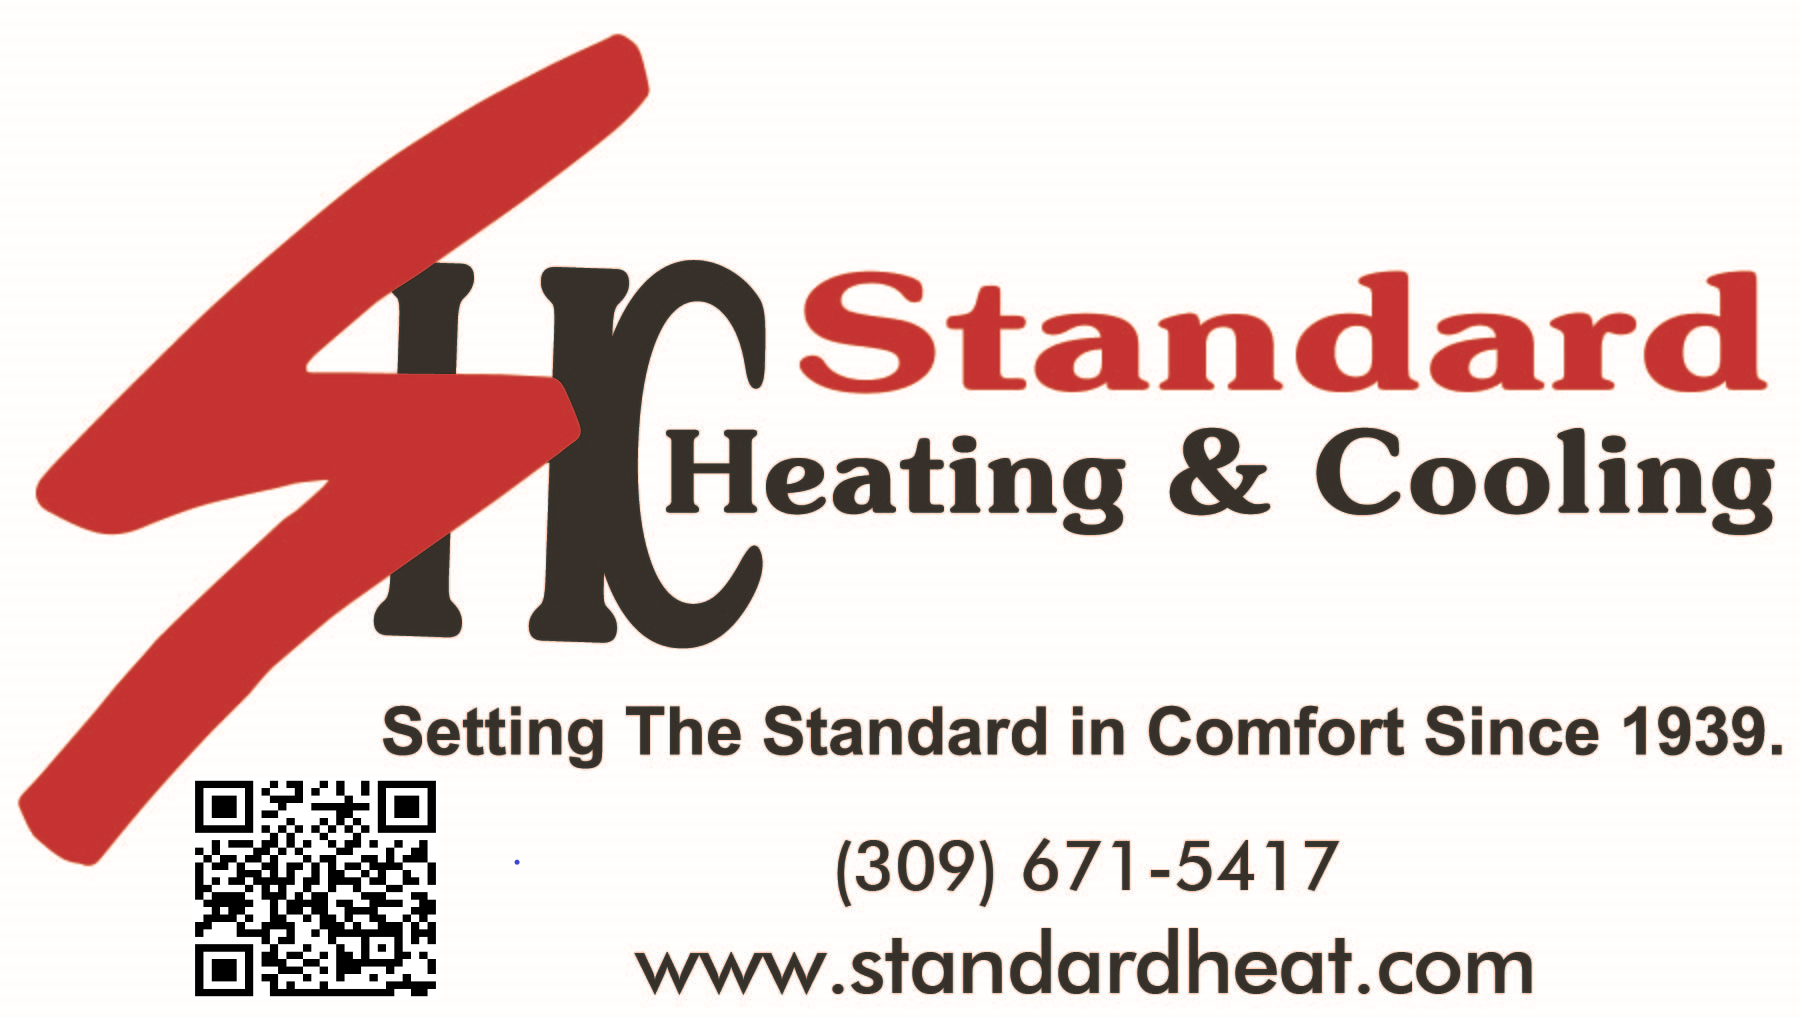 Standard Heating & Cooling